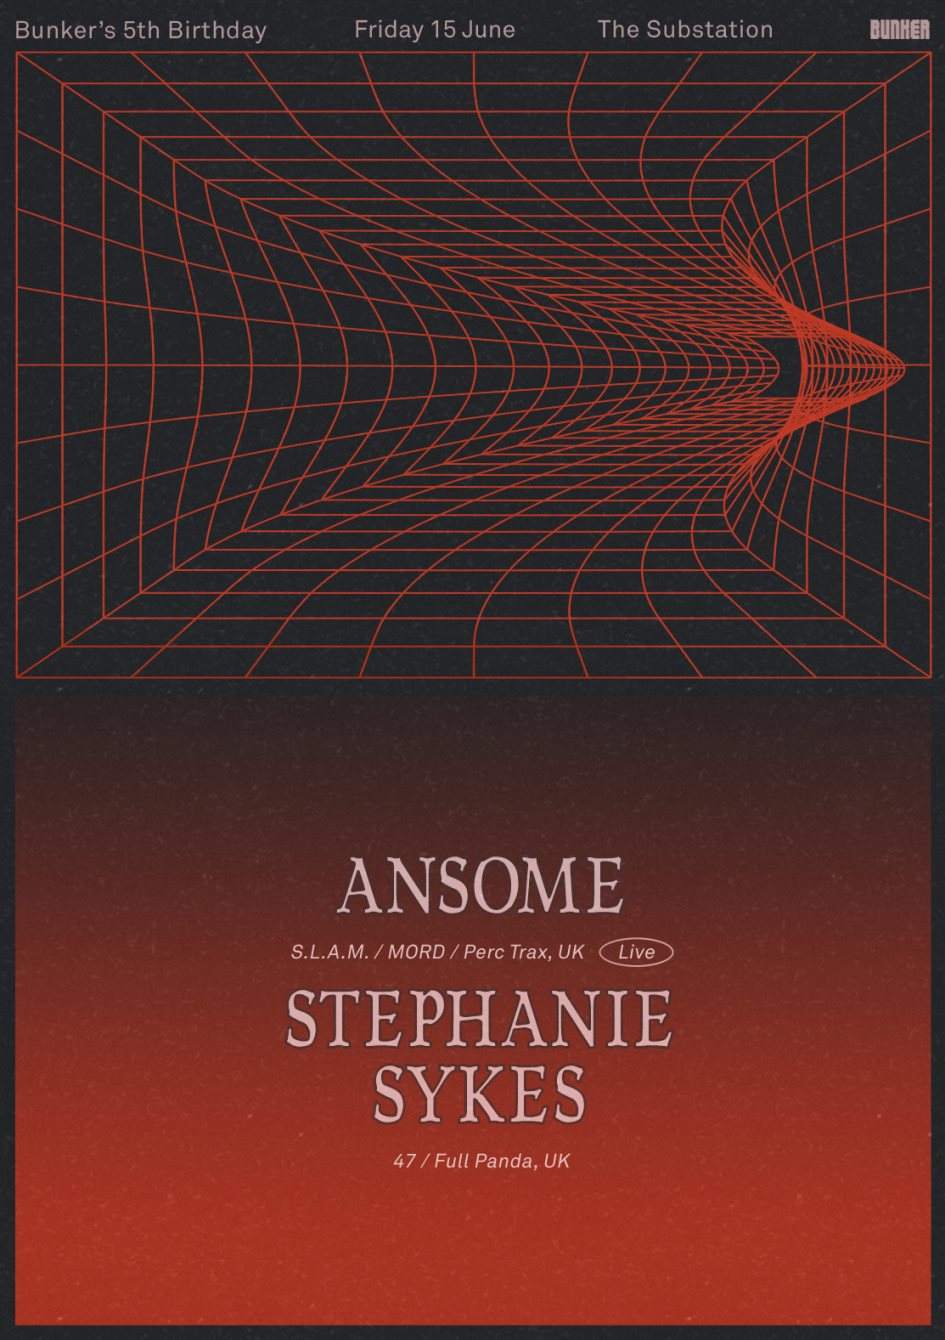 Bunkers 5th Birthday with Ansome (Live) & Stephanie Sykes - Página frontal